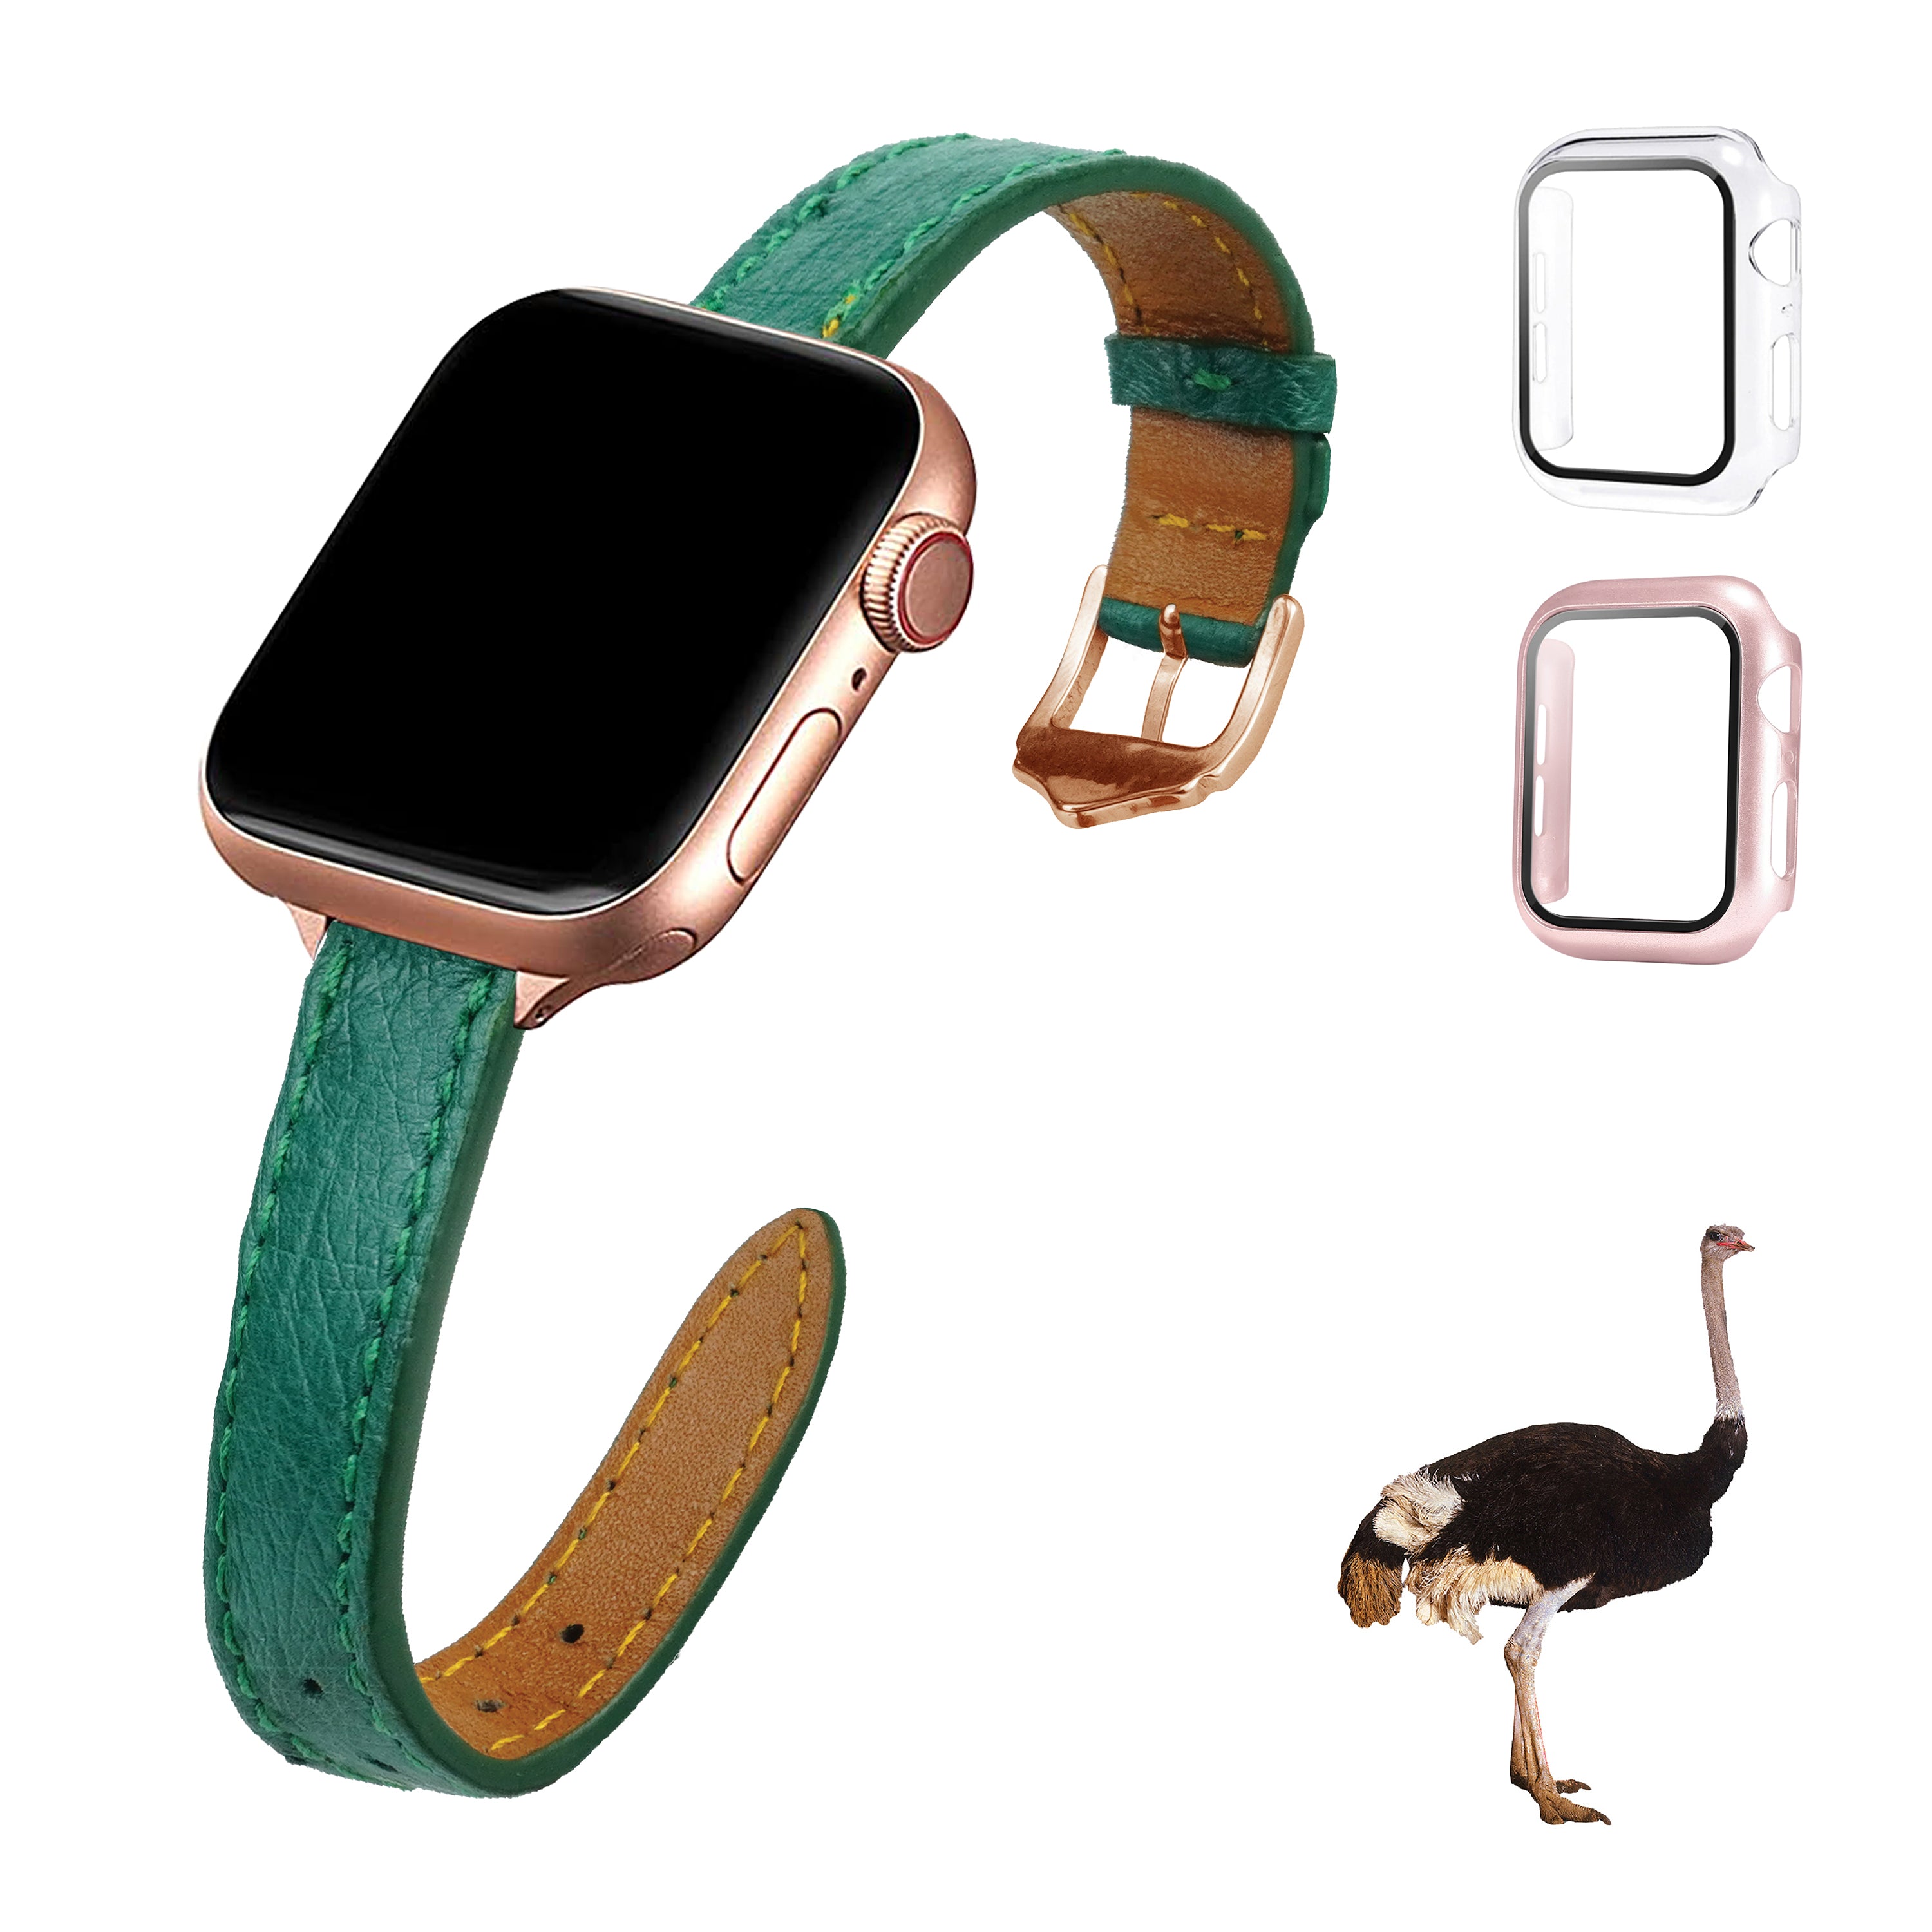 Green Flat Ostrich Leather Band Compatible Apple Watch Iwatch 38mm Screen Protector Case Gold Adapter Replacement Strap For Smartwatch Series 1 2 3 Leather Handmade AW-188G-W-38MM